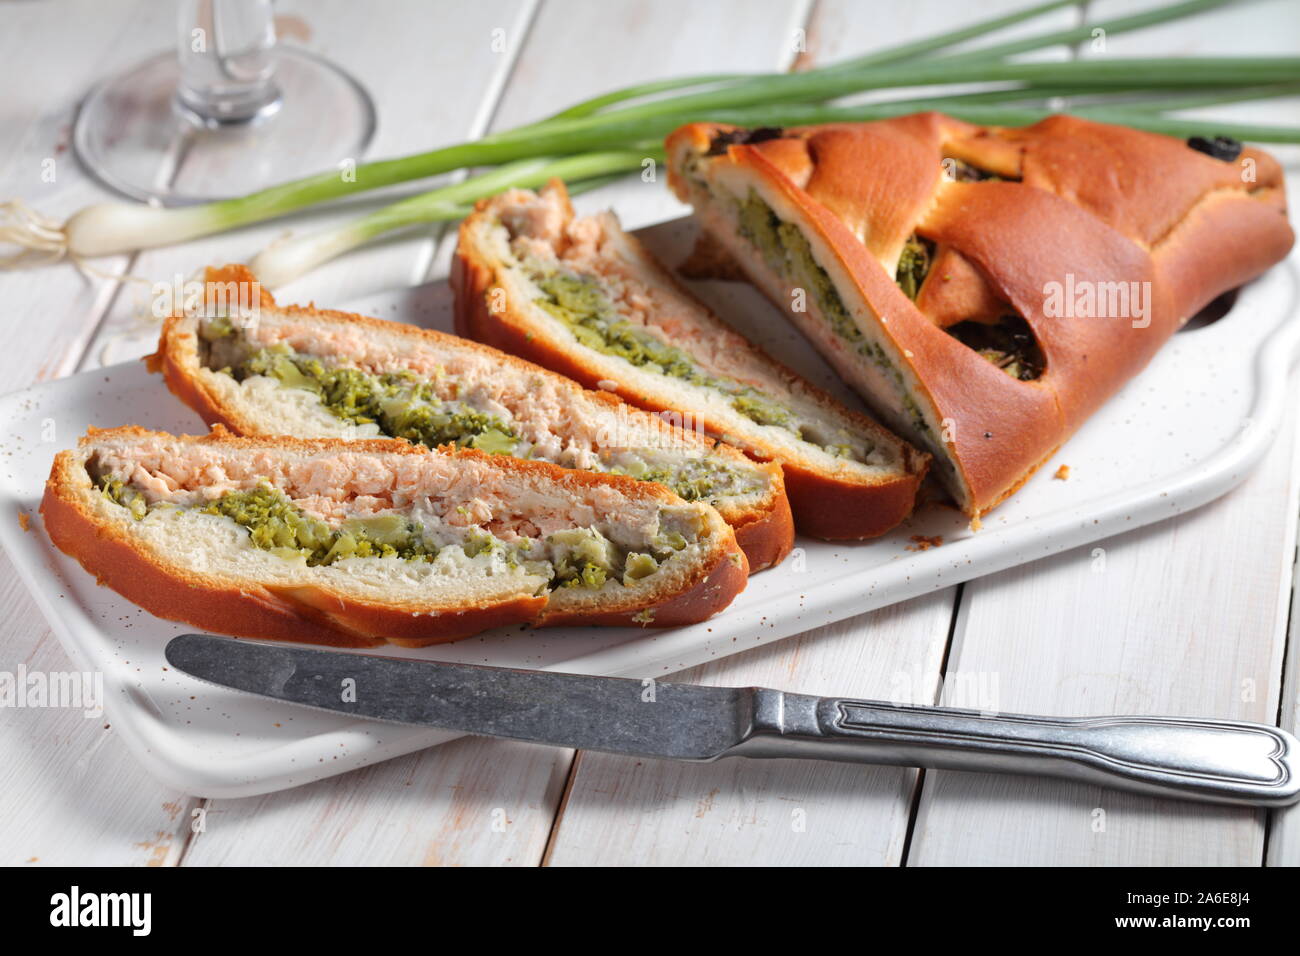 Sliced salmon and broccoli pie on a rustic table Stock Photo